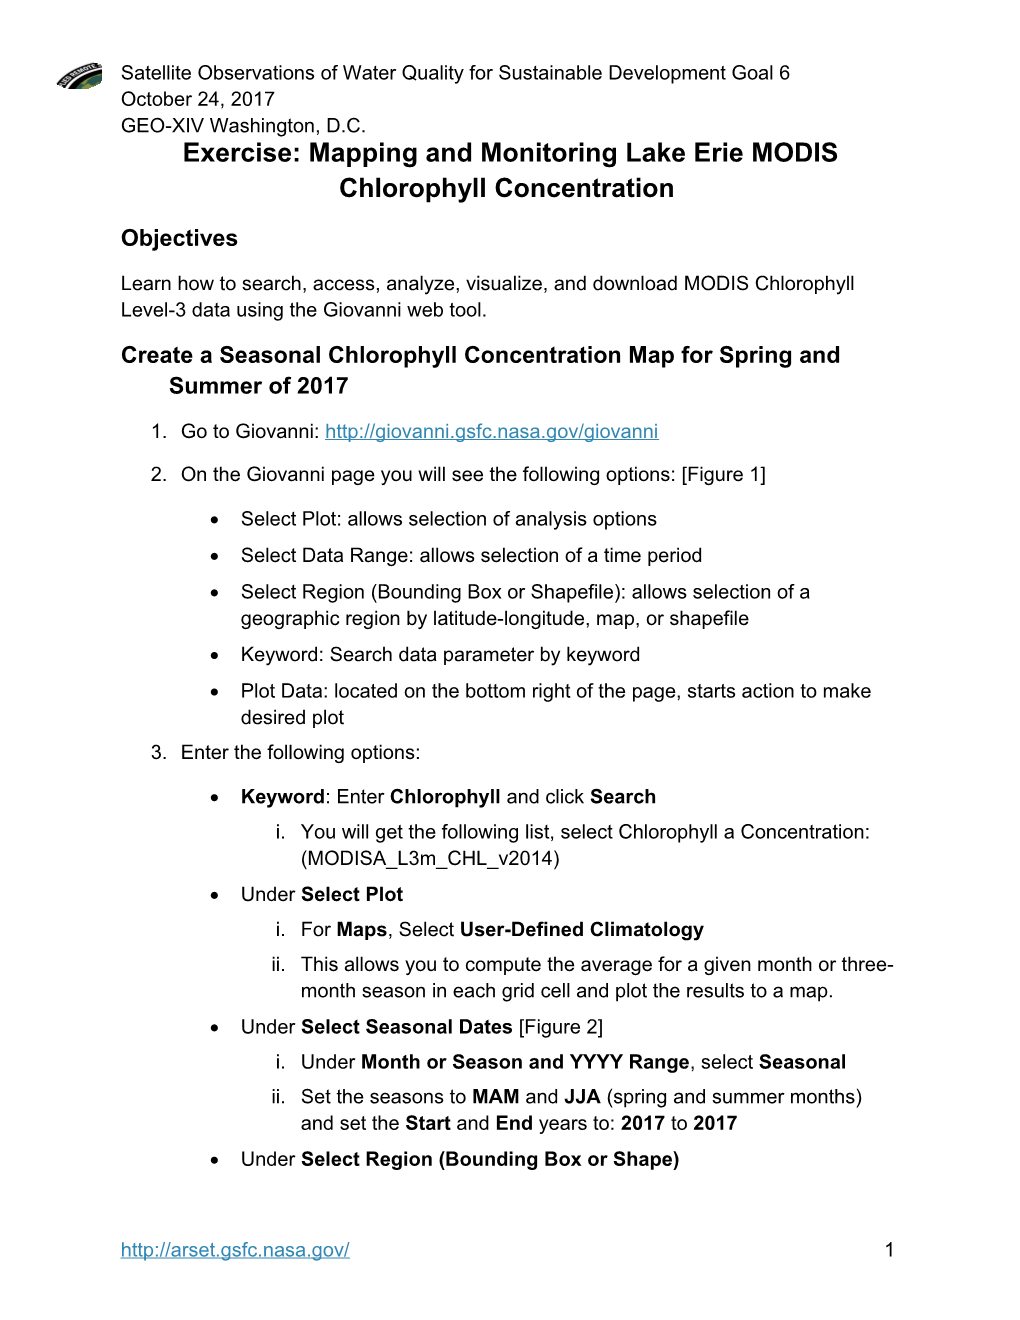 Exercise: Mapping and Monitoring Lake Erie MODIS Chlorophyll Concentration